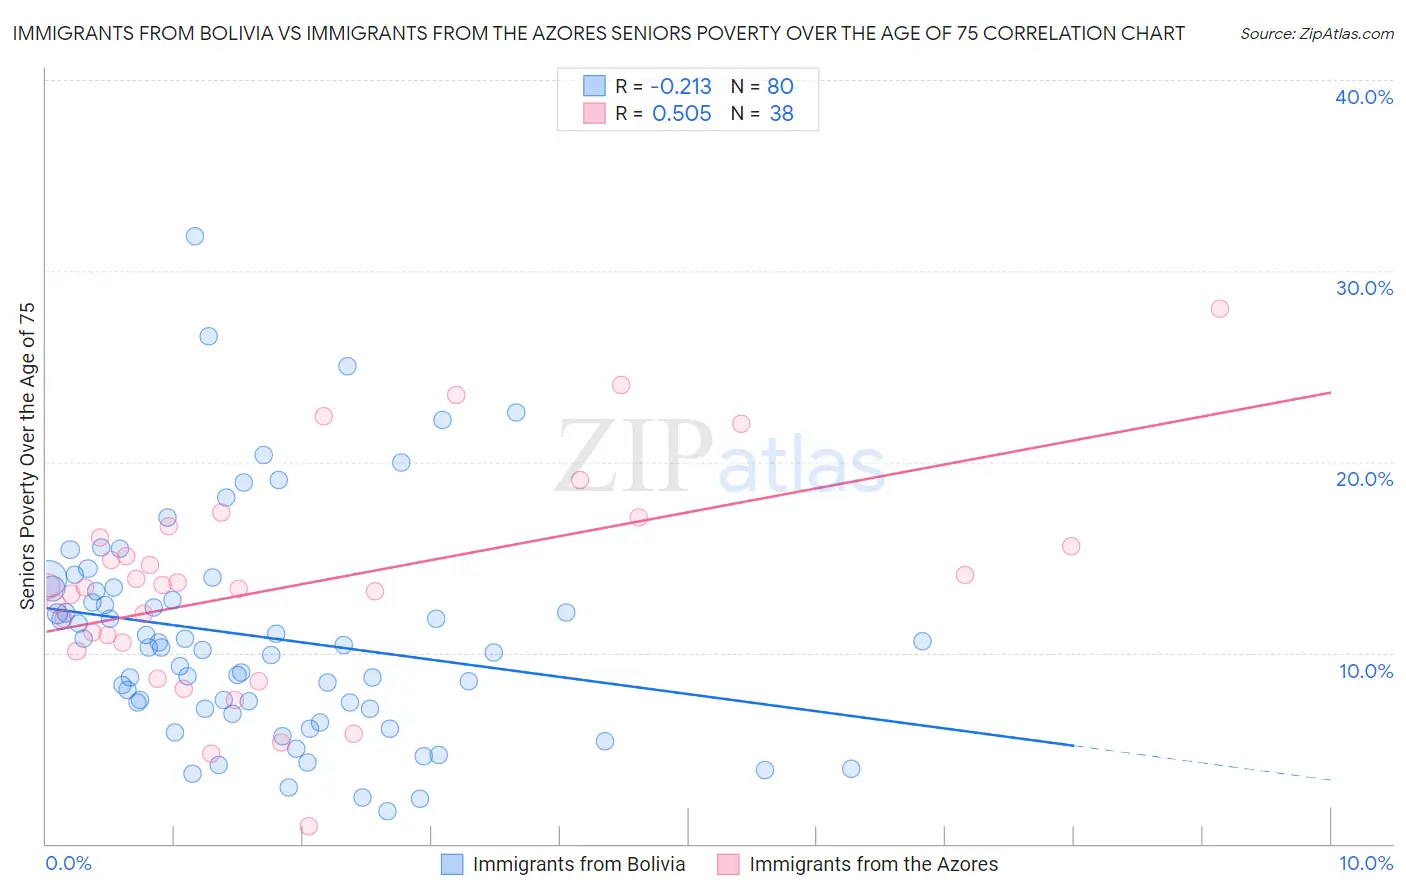 Immigrants from Bolivia vs Immigrants from the Azores Seniors Poverty Over the Age of 75